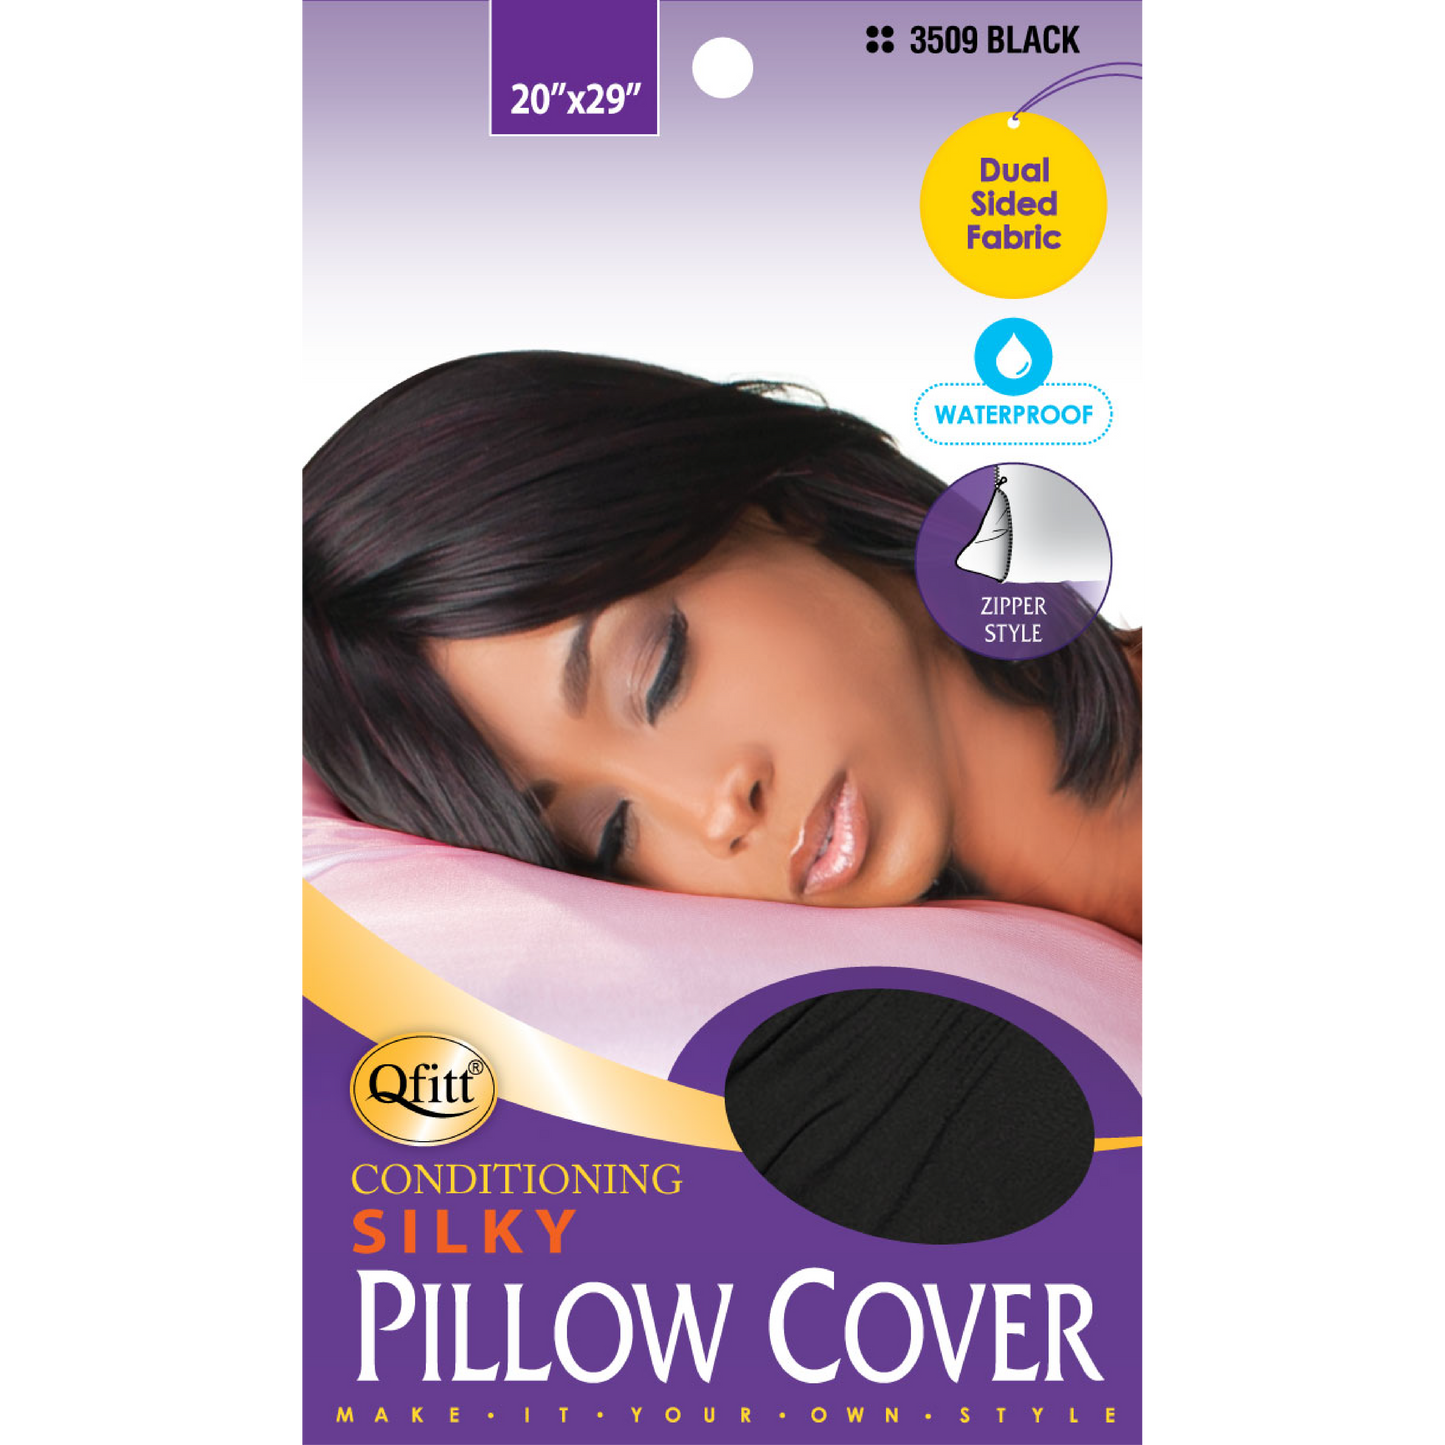 SILKY CONDITIONING PILLOW COVER